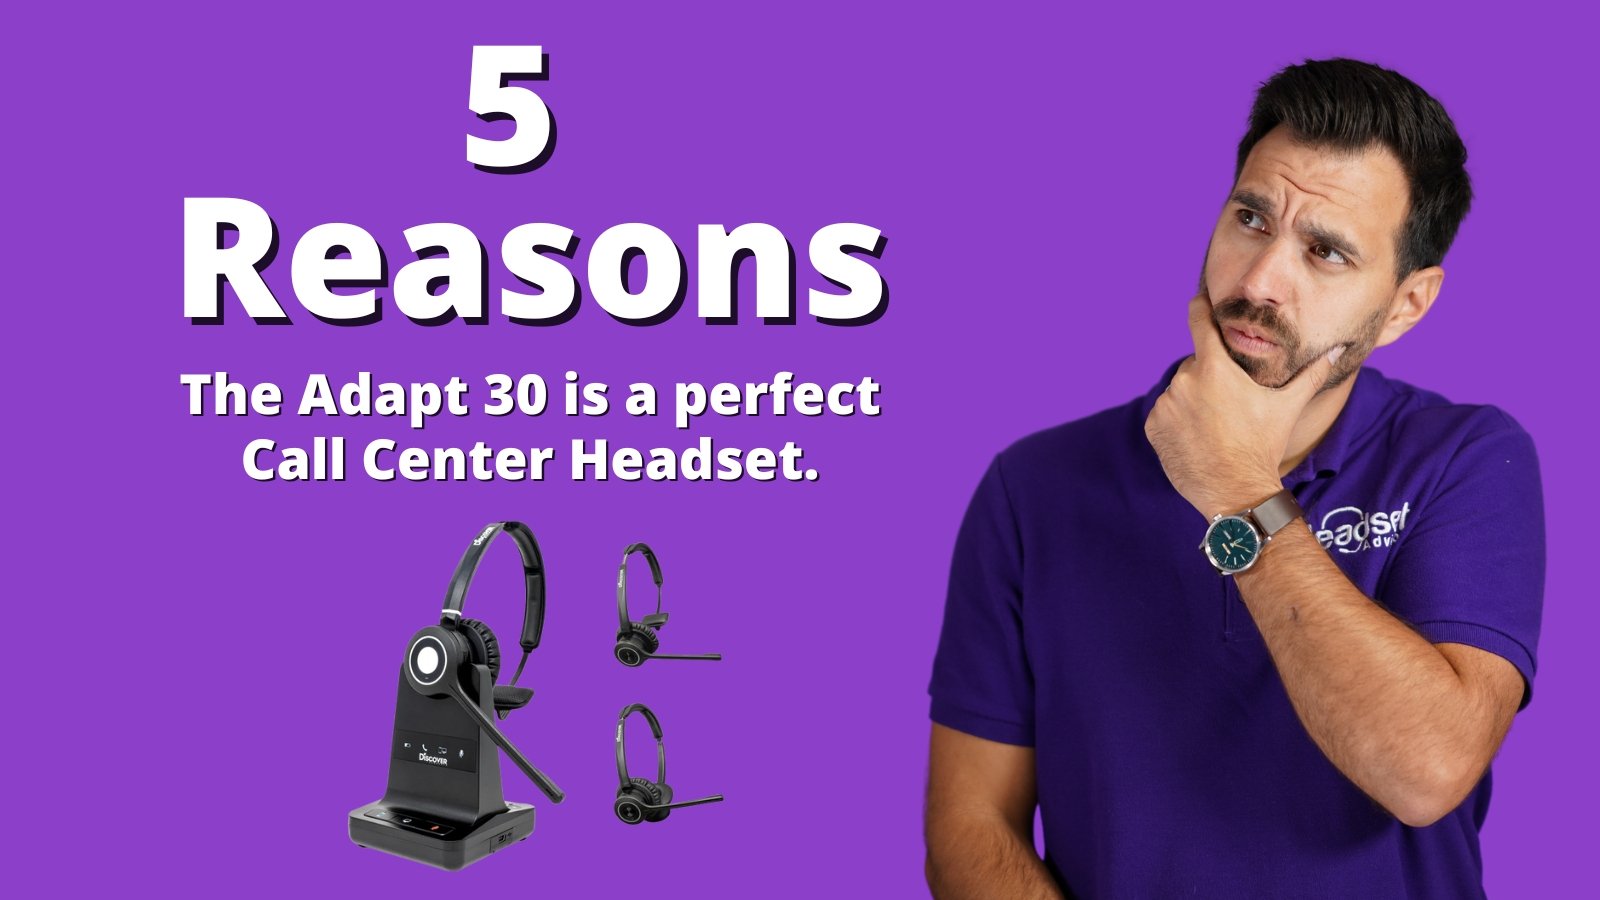 5 Reasons Discover Adapt 30 Is A Perfect Wireless Headset For The Contact Center - Headset Advisor